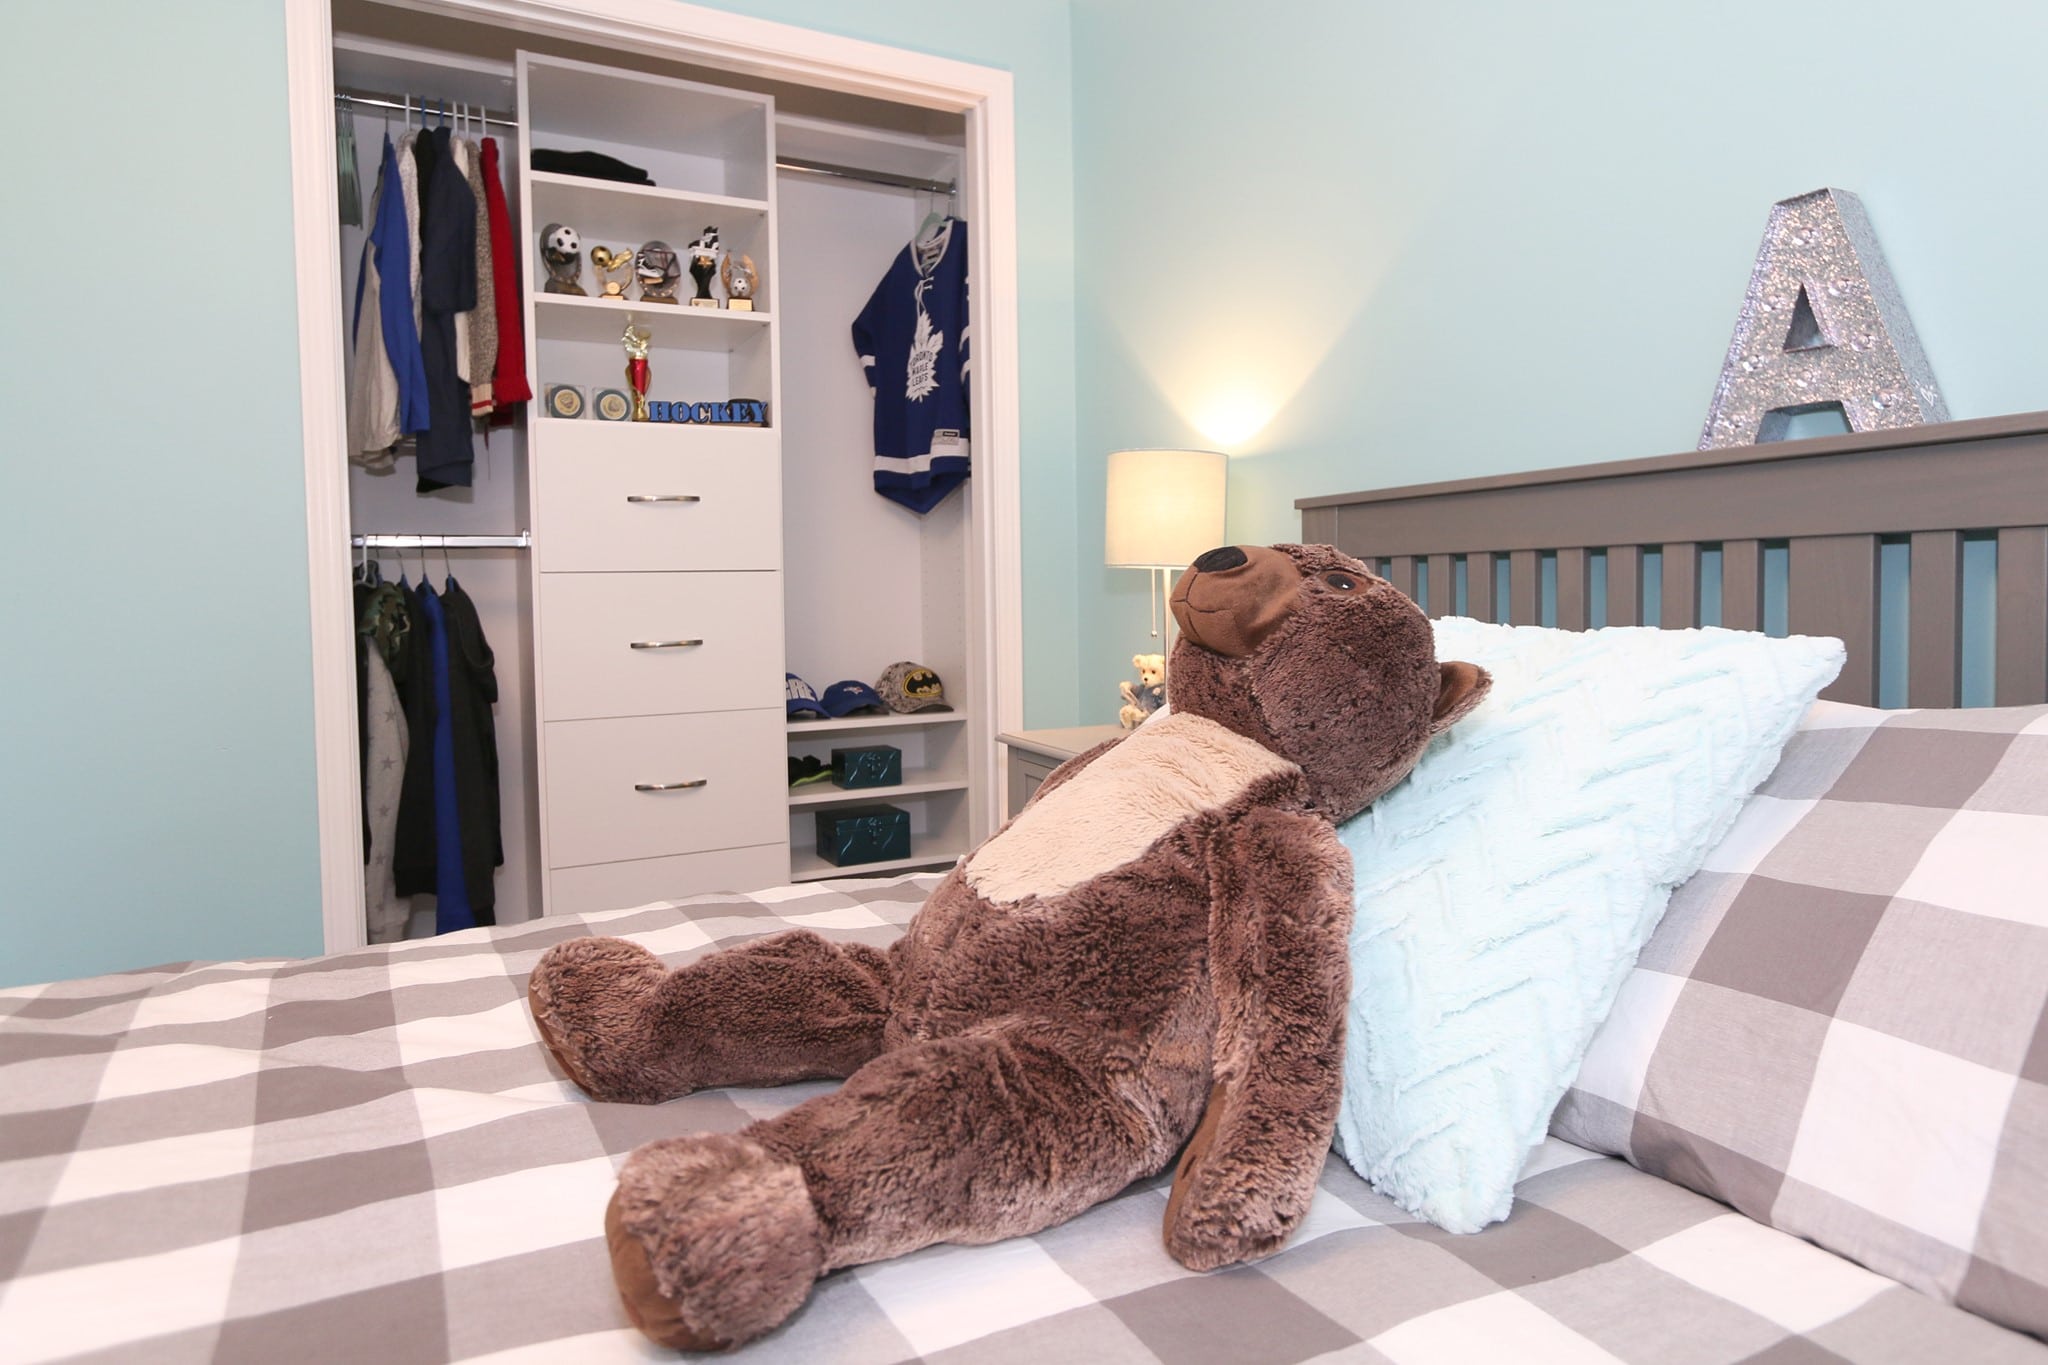 organize your child's room with a built-in closet